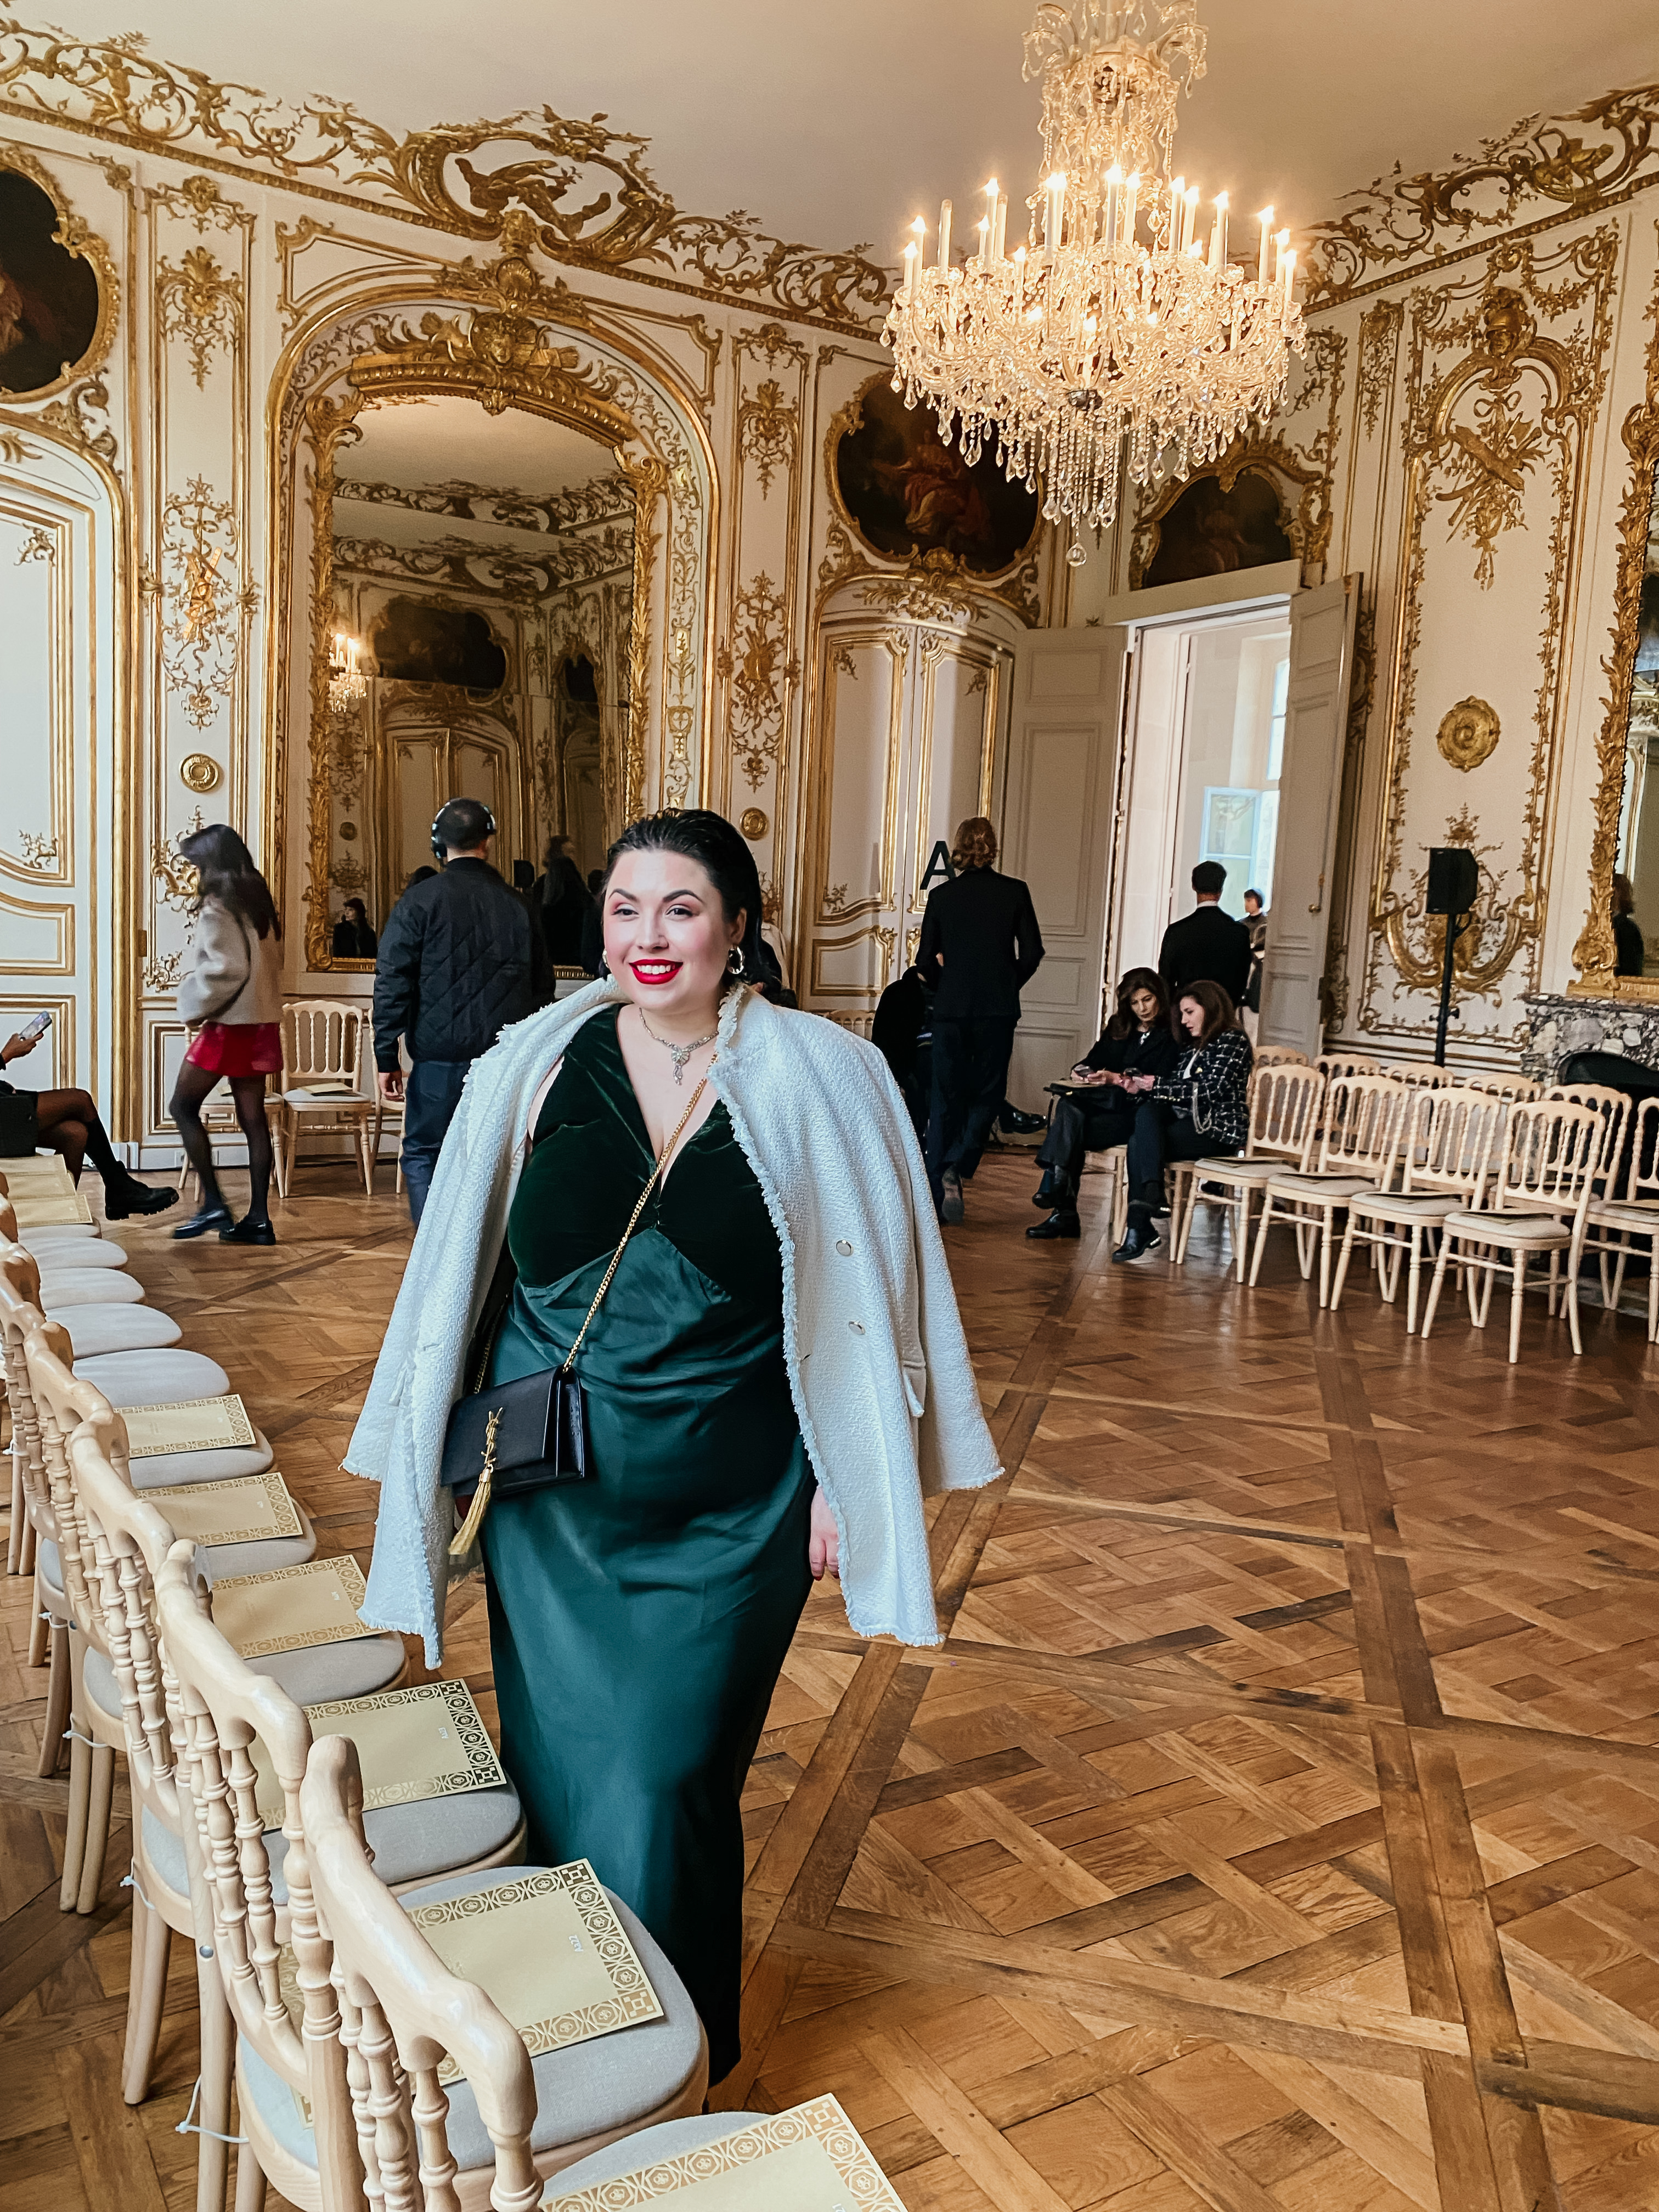 A picture of Michaela Leitz in the old parisian living room of Karl Lagerfeld during the haute couture fashion week Paris.